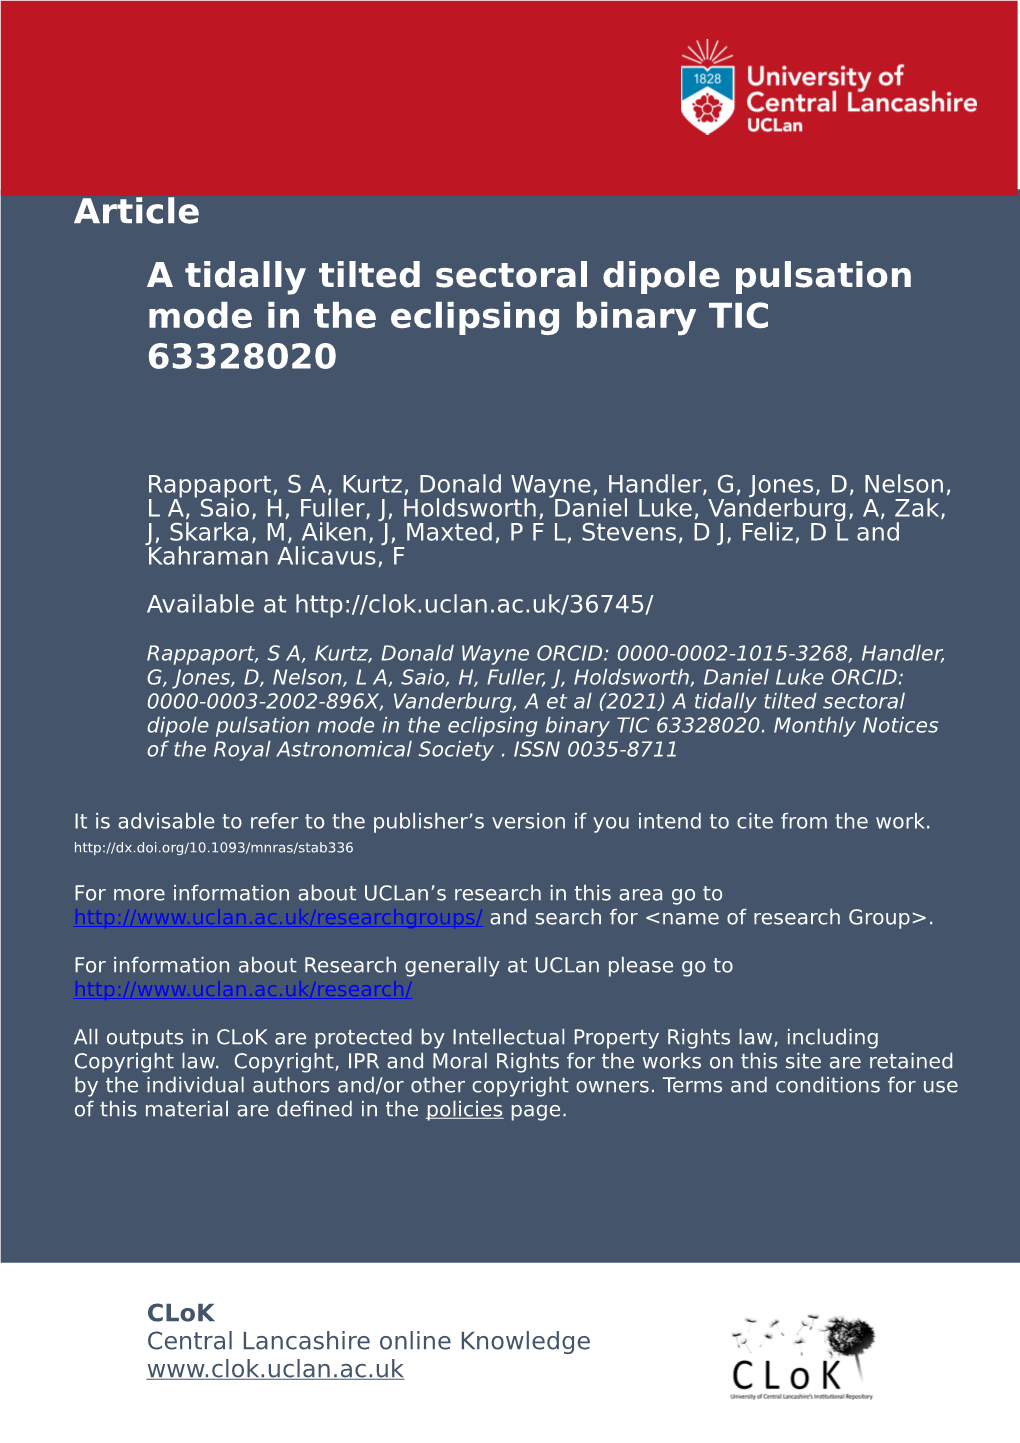 Article a Tidally Tilted Sectoral Dipole Pulsation Mode in the Eclipsing Binary TIC 63328020